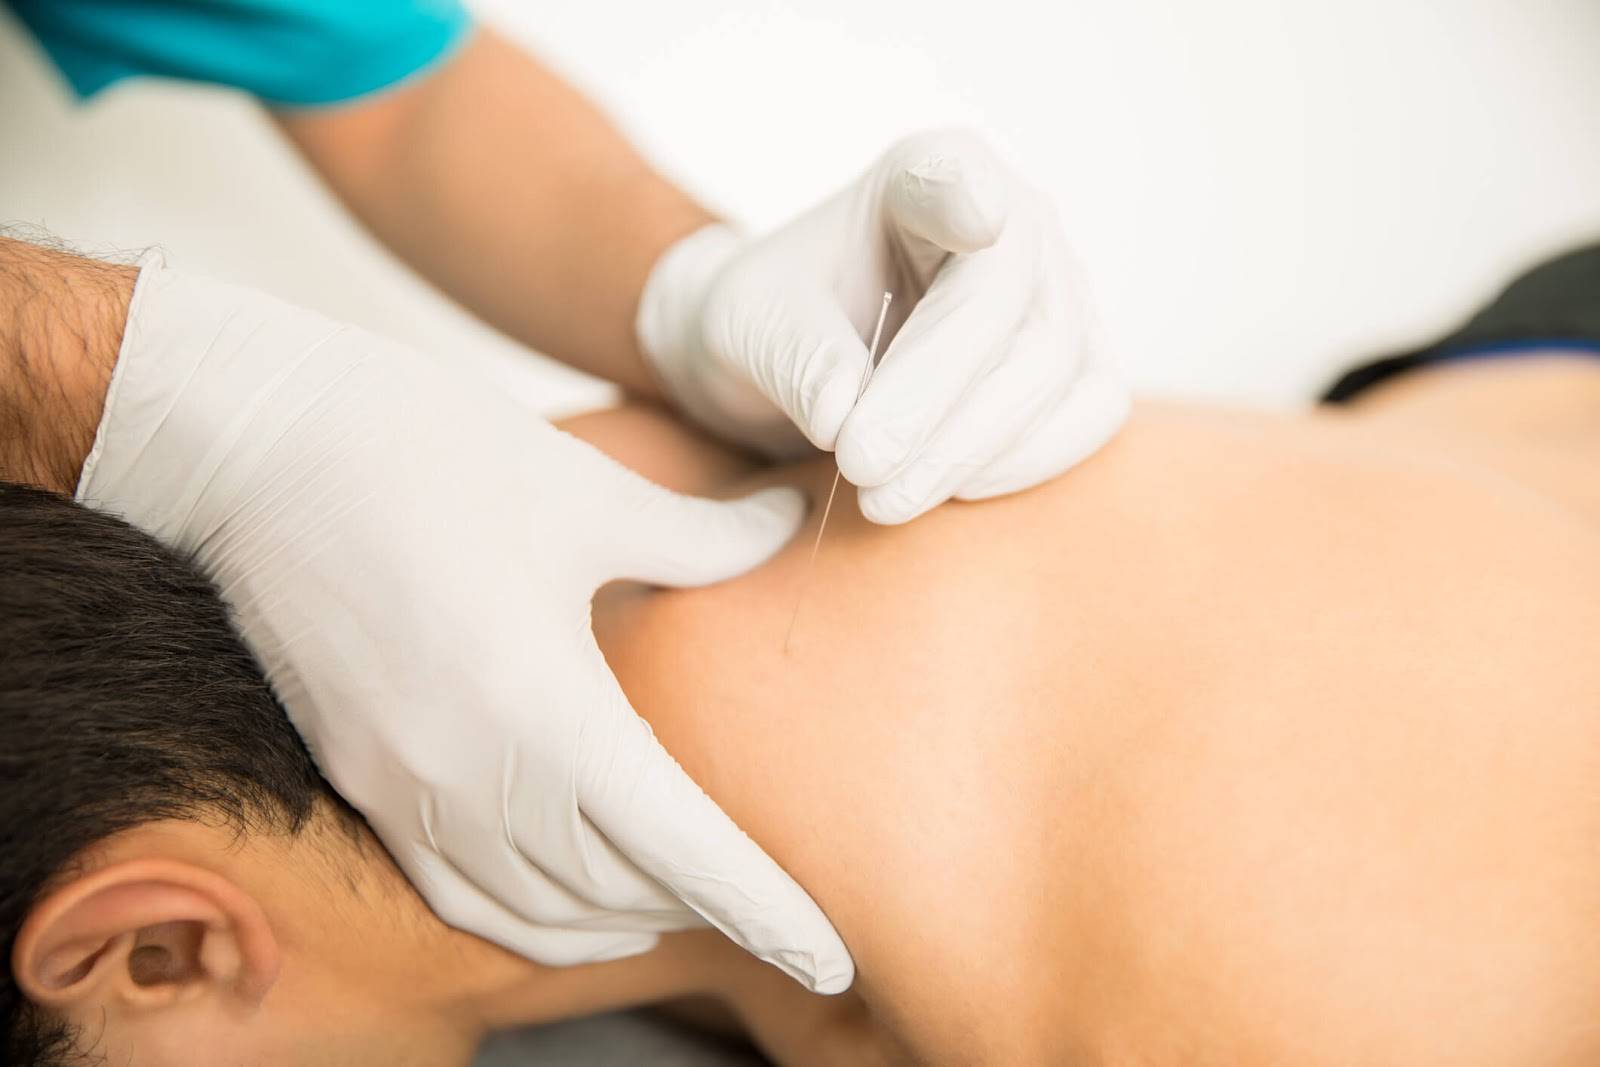 can dry needling cause nerve damage